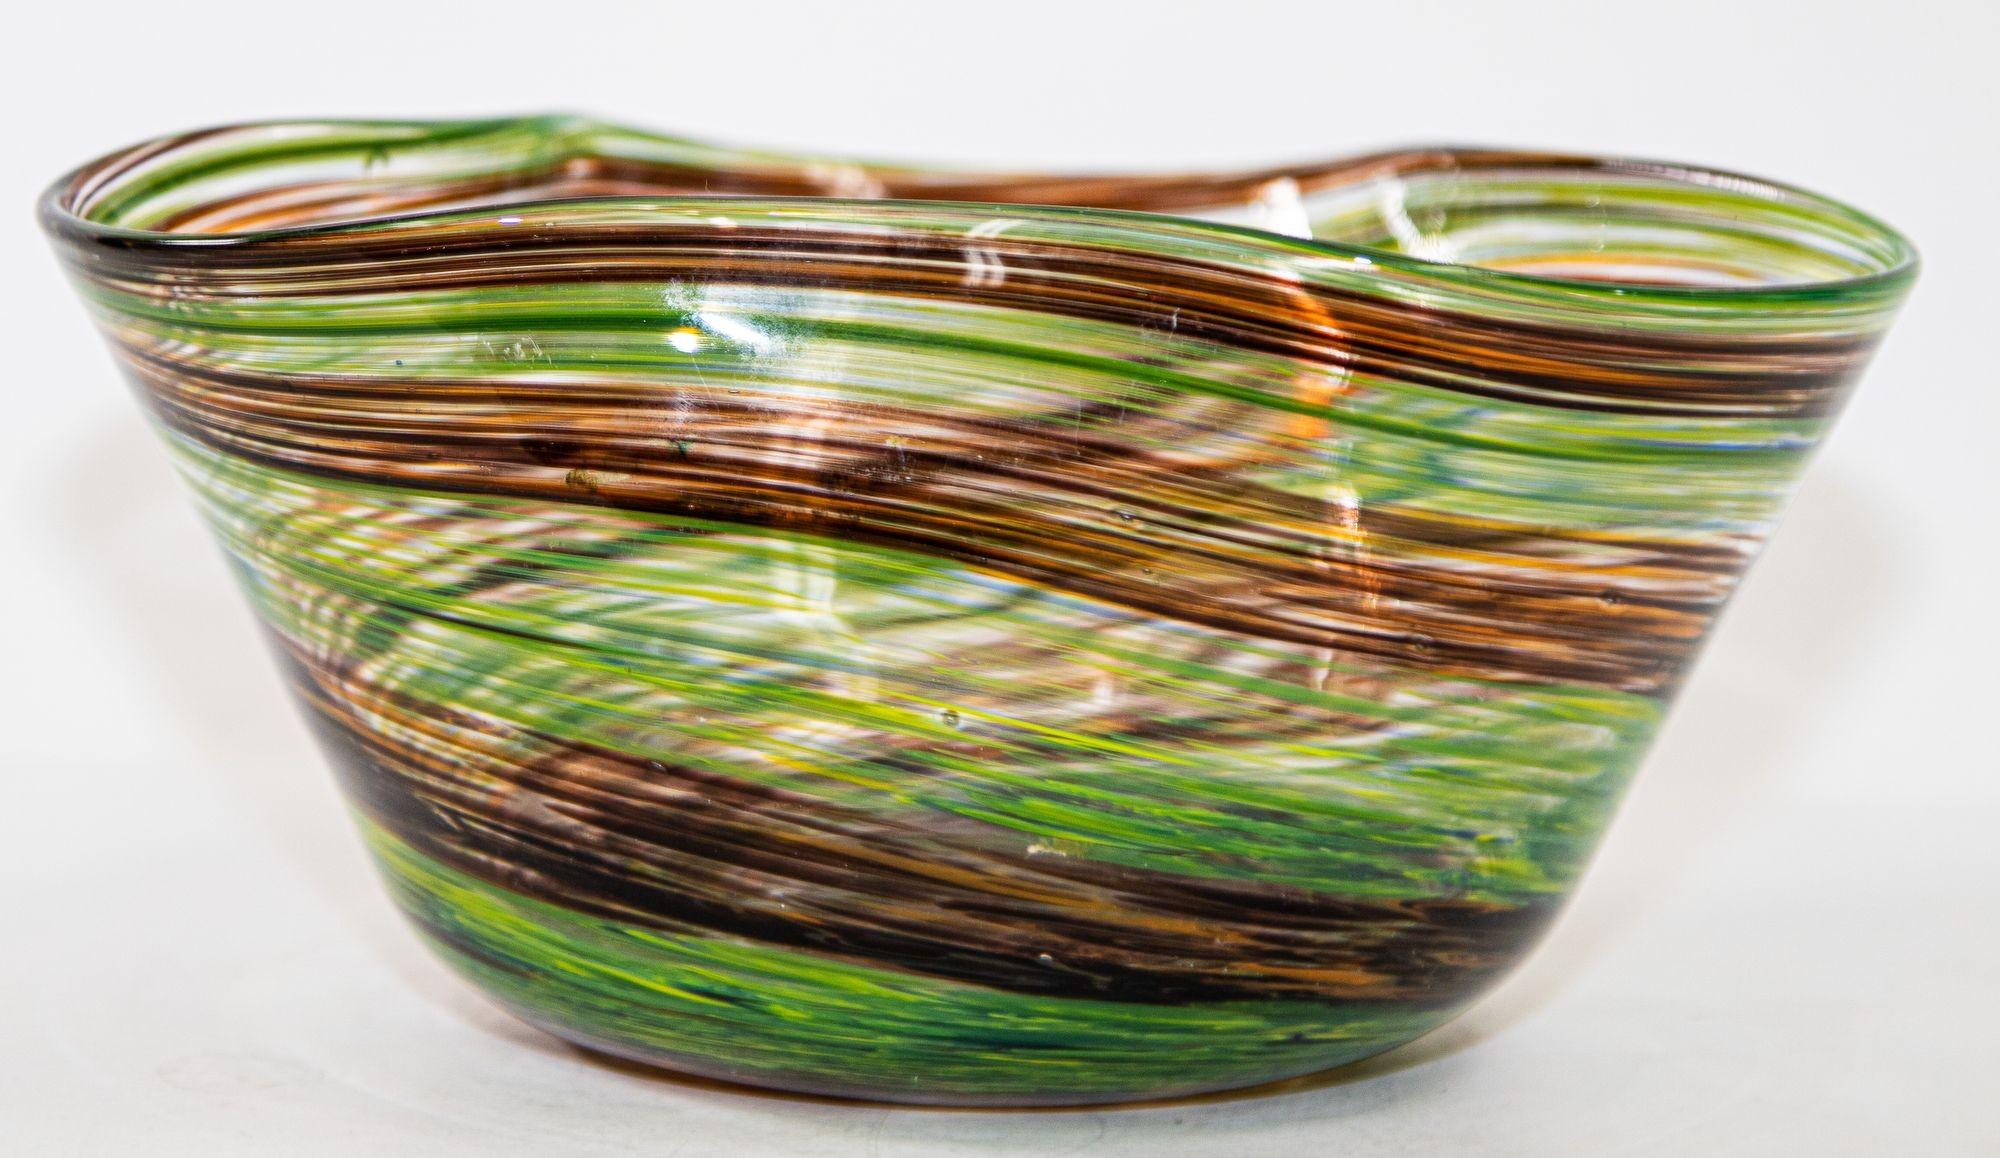 Vintage colored striped vase in Murano hand blown glass clear with green and brown colored bowl.
Murano Art Glass decorative bowl, realized with a swirl of brown and green orange pattern.
A vintage 1980s Venetian striped glass decorative